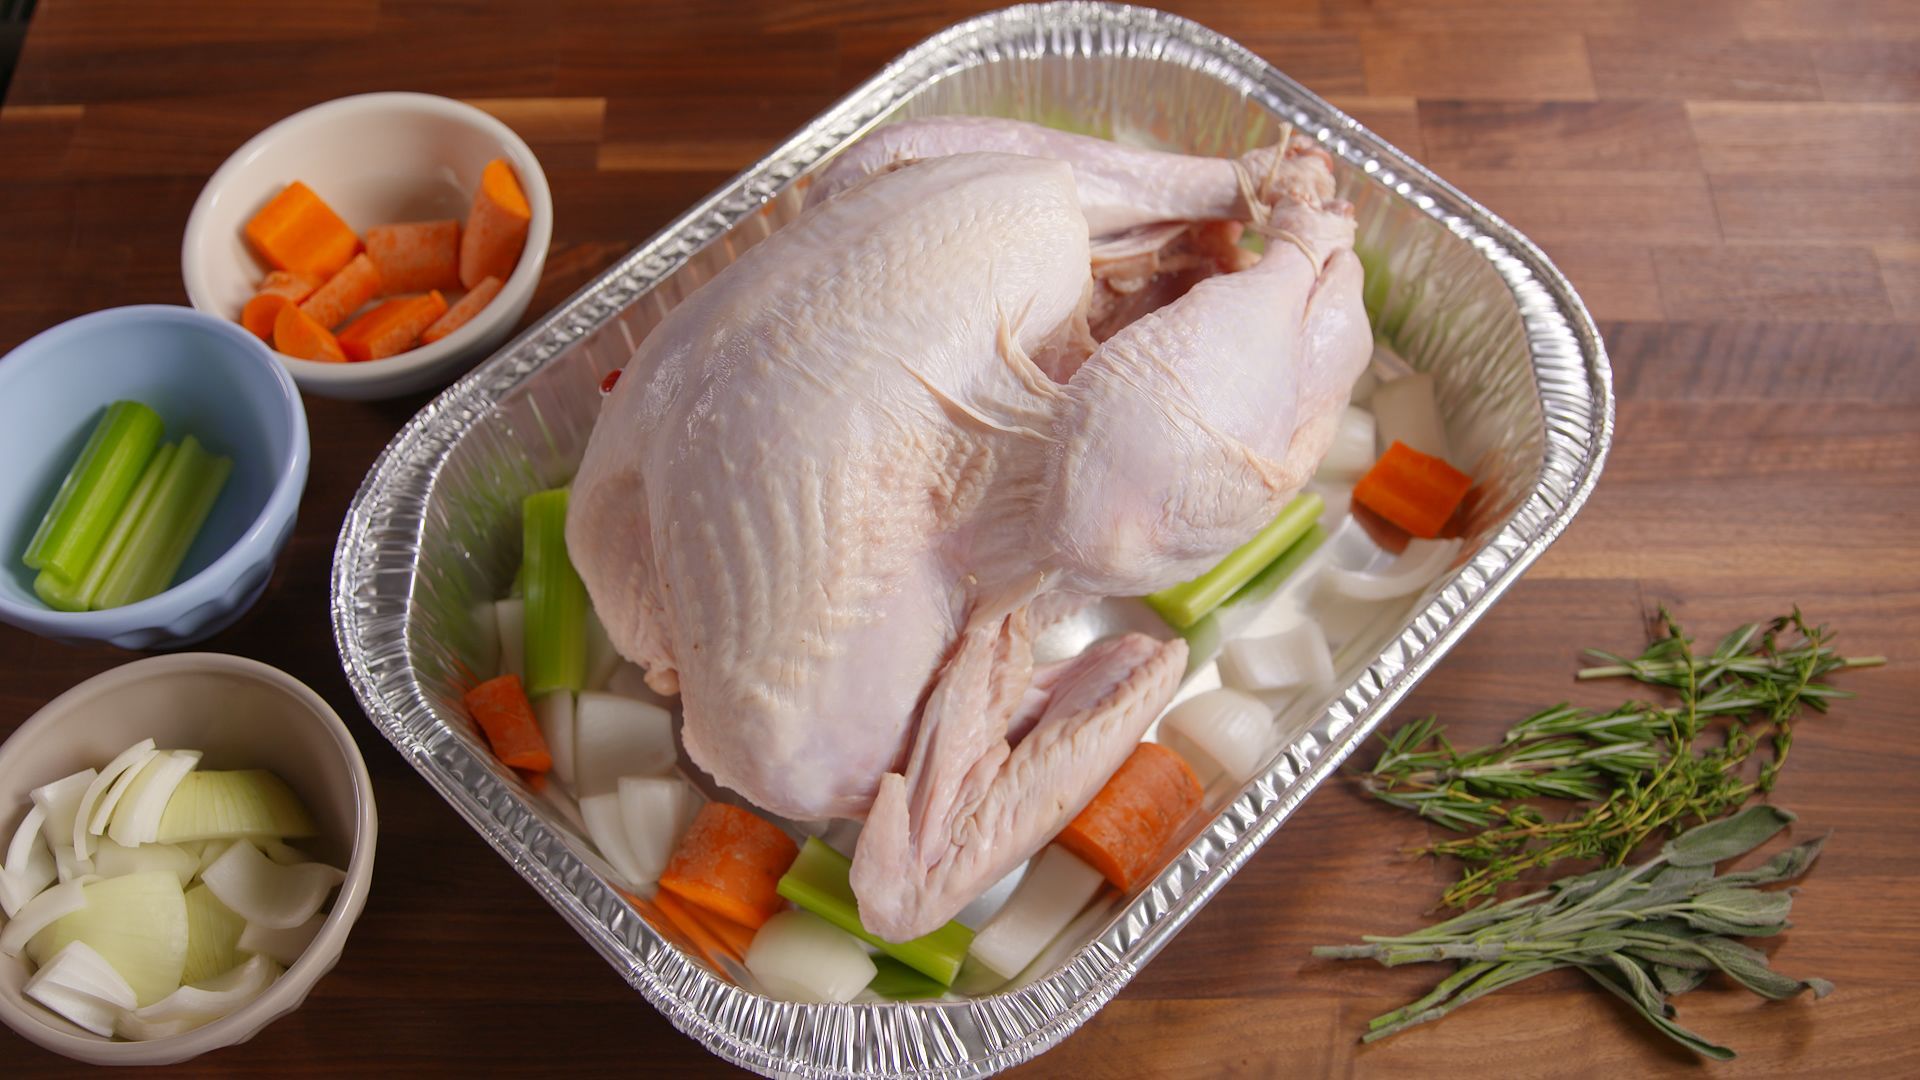 How To Roast Turkey Without Bag